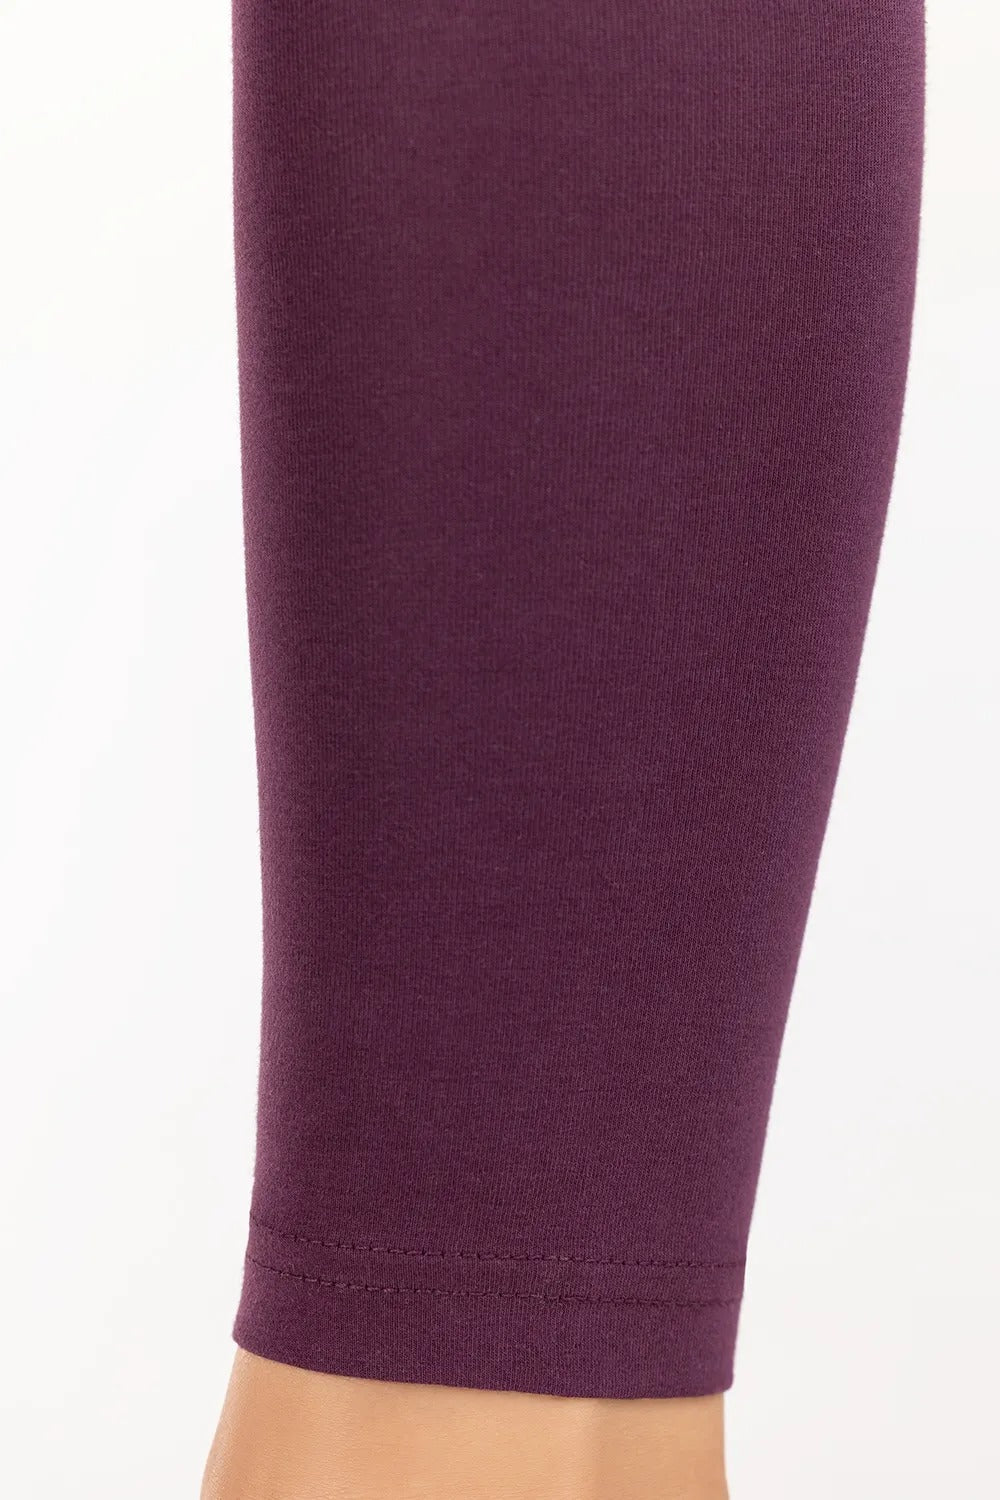 Gul Ahmed 01 Piece Stitched Purple Jersey Tights TR-21-50